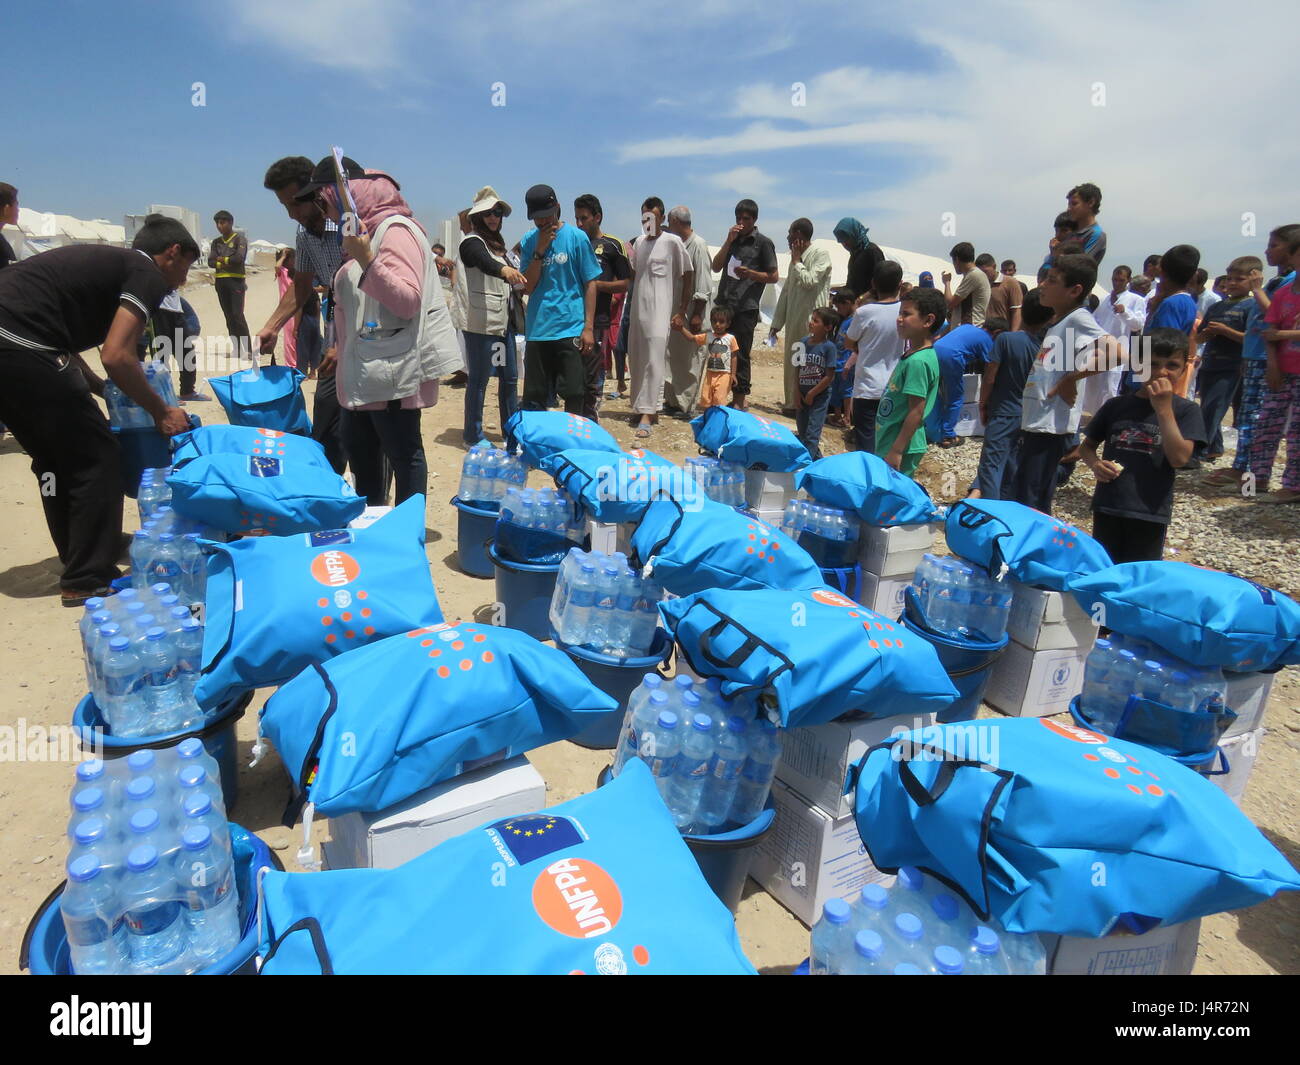 Mosul, Iraq. 13th May, 2017. People get relief supplies in the Hassansham U2 Camp, about 30 kms east to Mosul, Iraq, on May 13, 2017. The camp has a capacity to accommodate more than 9,000 people when fully occupied. According to Iraqi authorities, more than 630,000 people have been displaced from Mosul and surrounding areas since October 2016, when the military operation began. This includes more than 434,000 displaced from western Mosul since mid-February of this year. Credit: Khalil Dawood/Xinhua/Alamy Live News Stock Photo